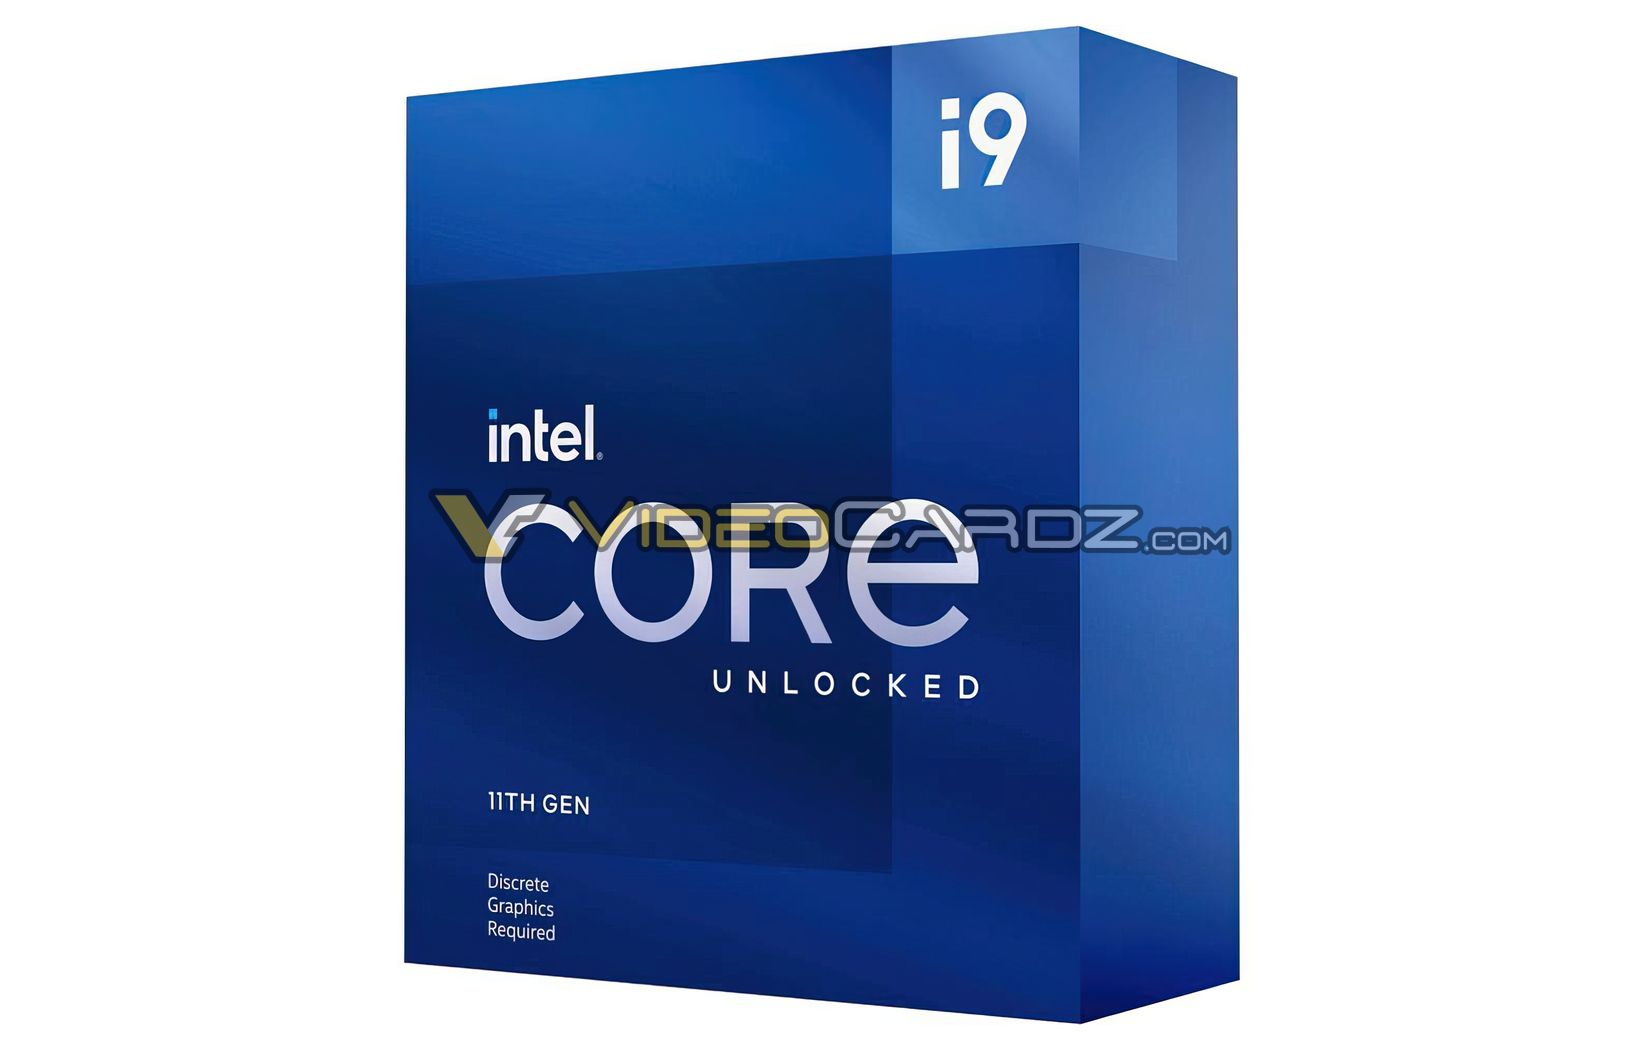 Images of Rocket Lake Intel Core i9 packaging leaked: The i9 